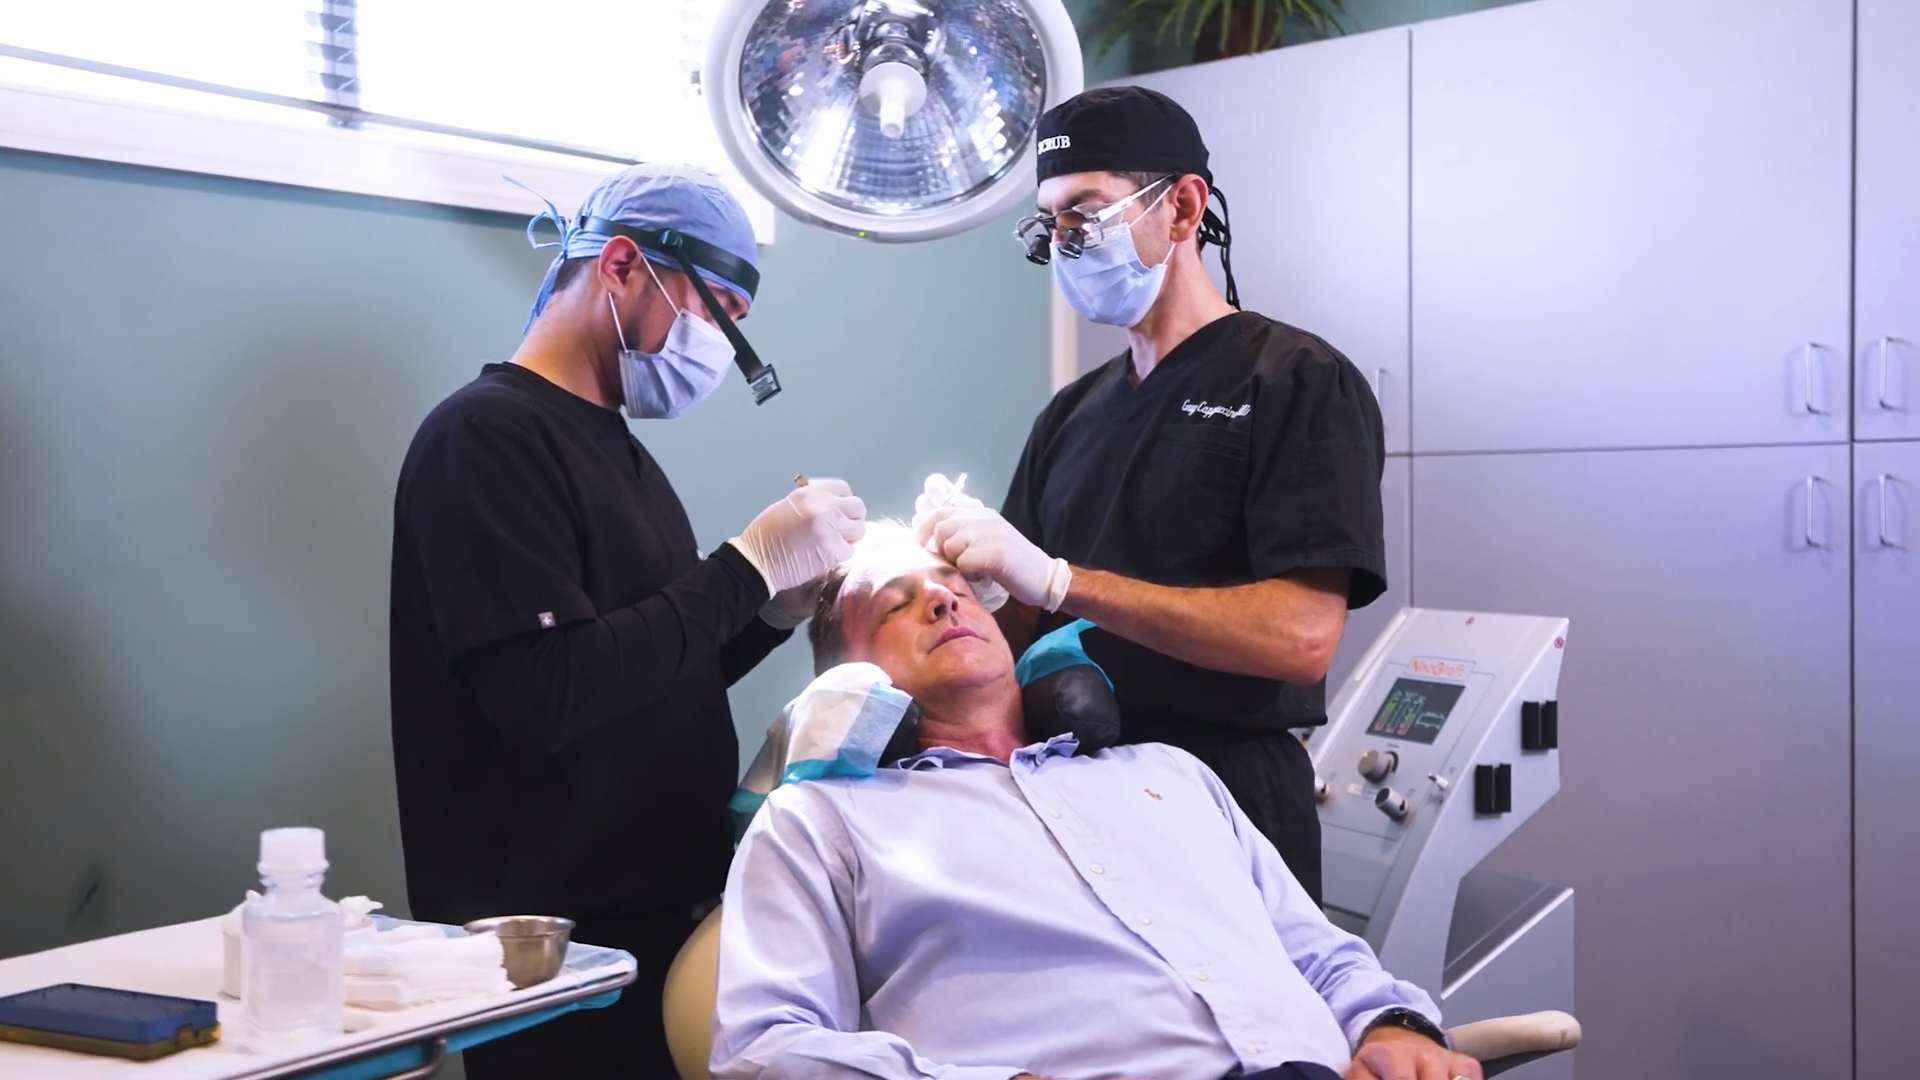 an image of Dr. Cappuccino conducting a hair transplant procedure on a patient